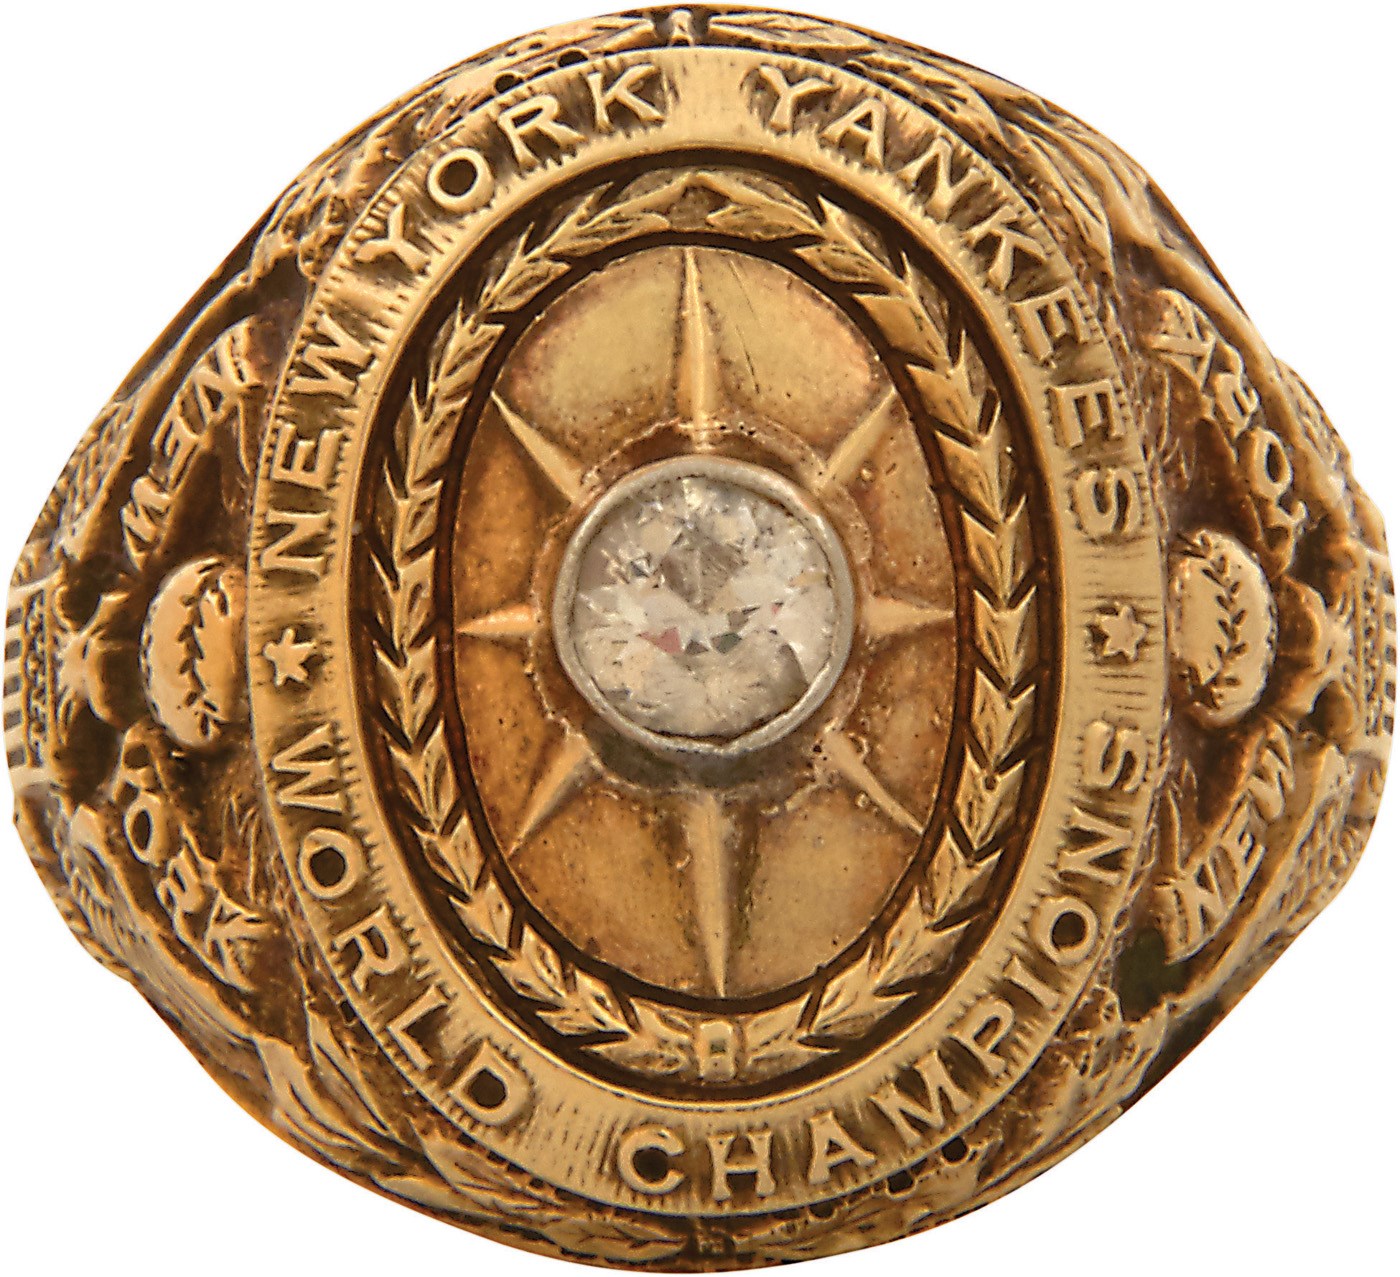 Babe Ruth and Lou Gehrig - Babe Ruth's 1927 New York Yankees World Series Ring